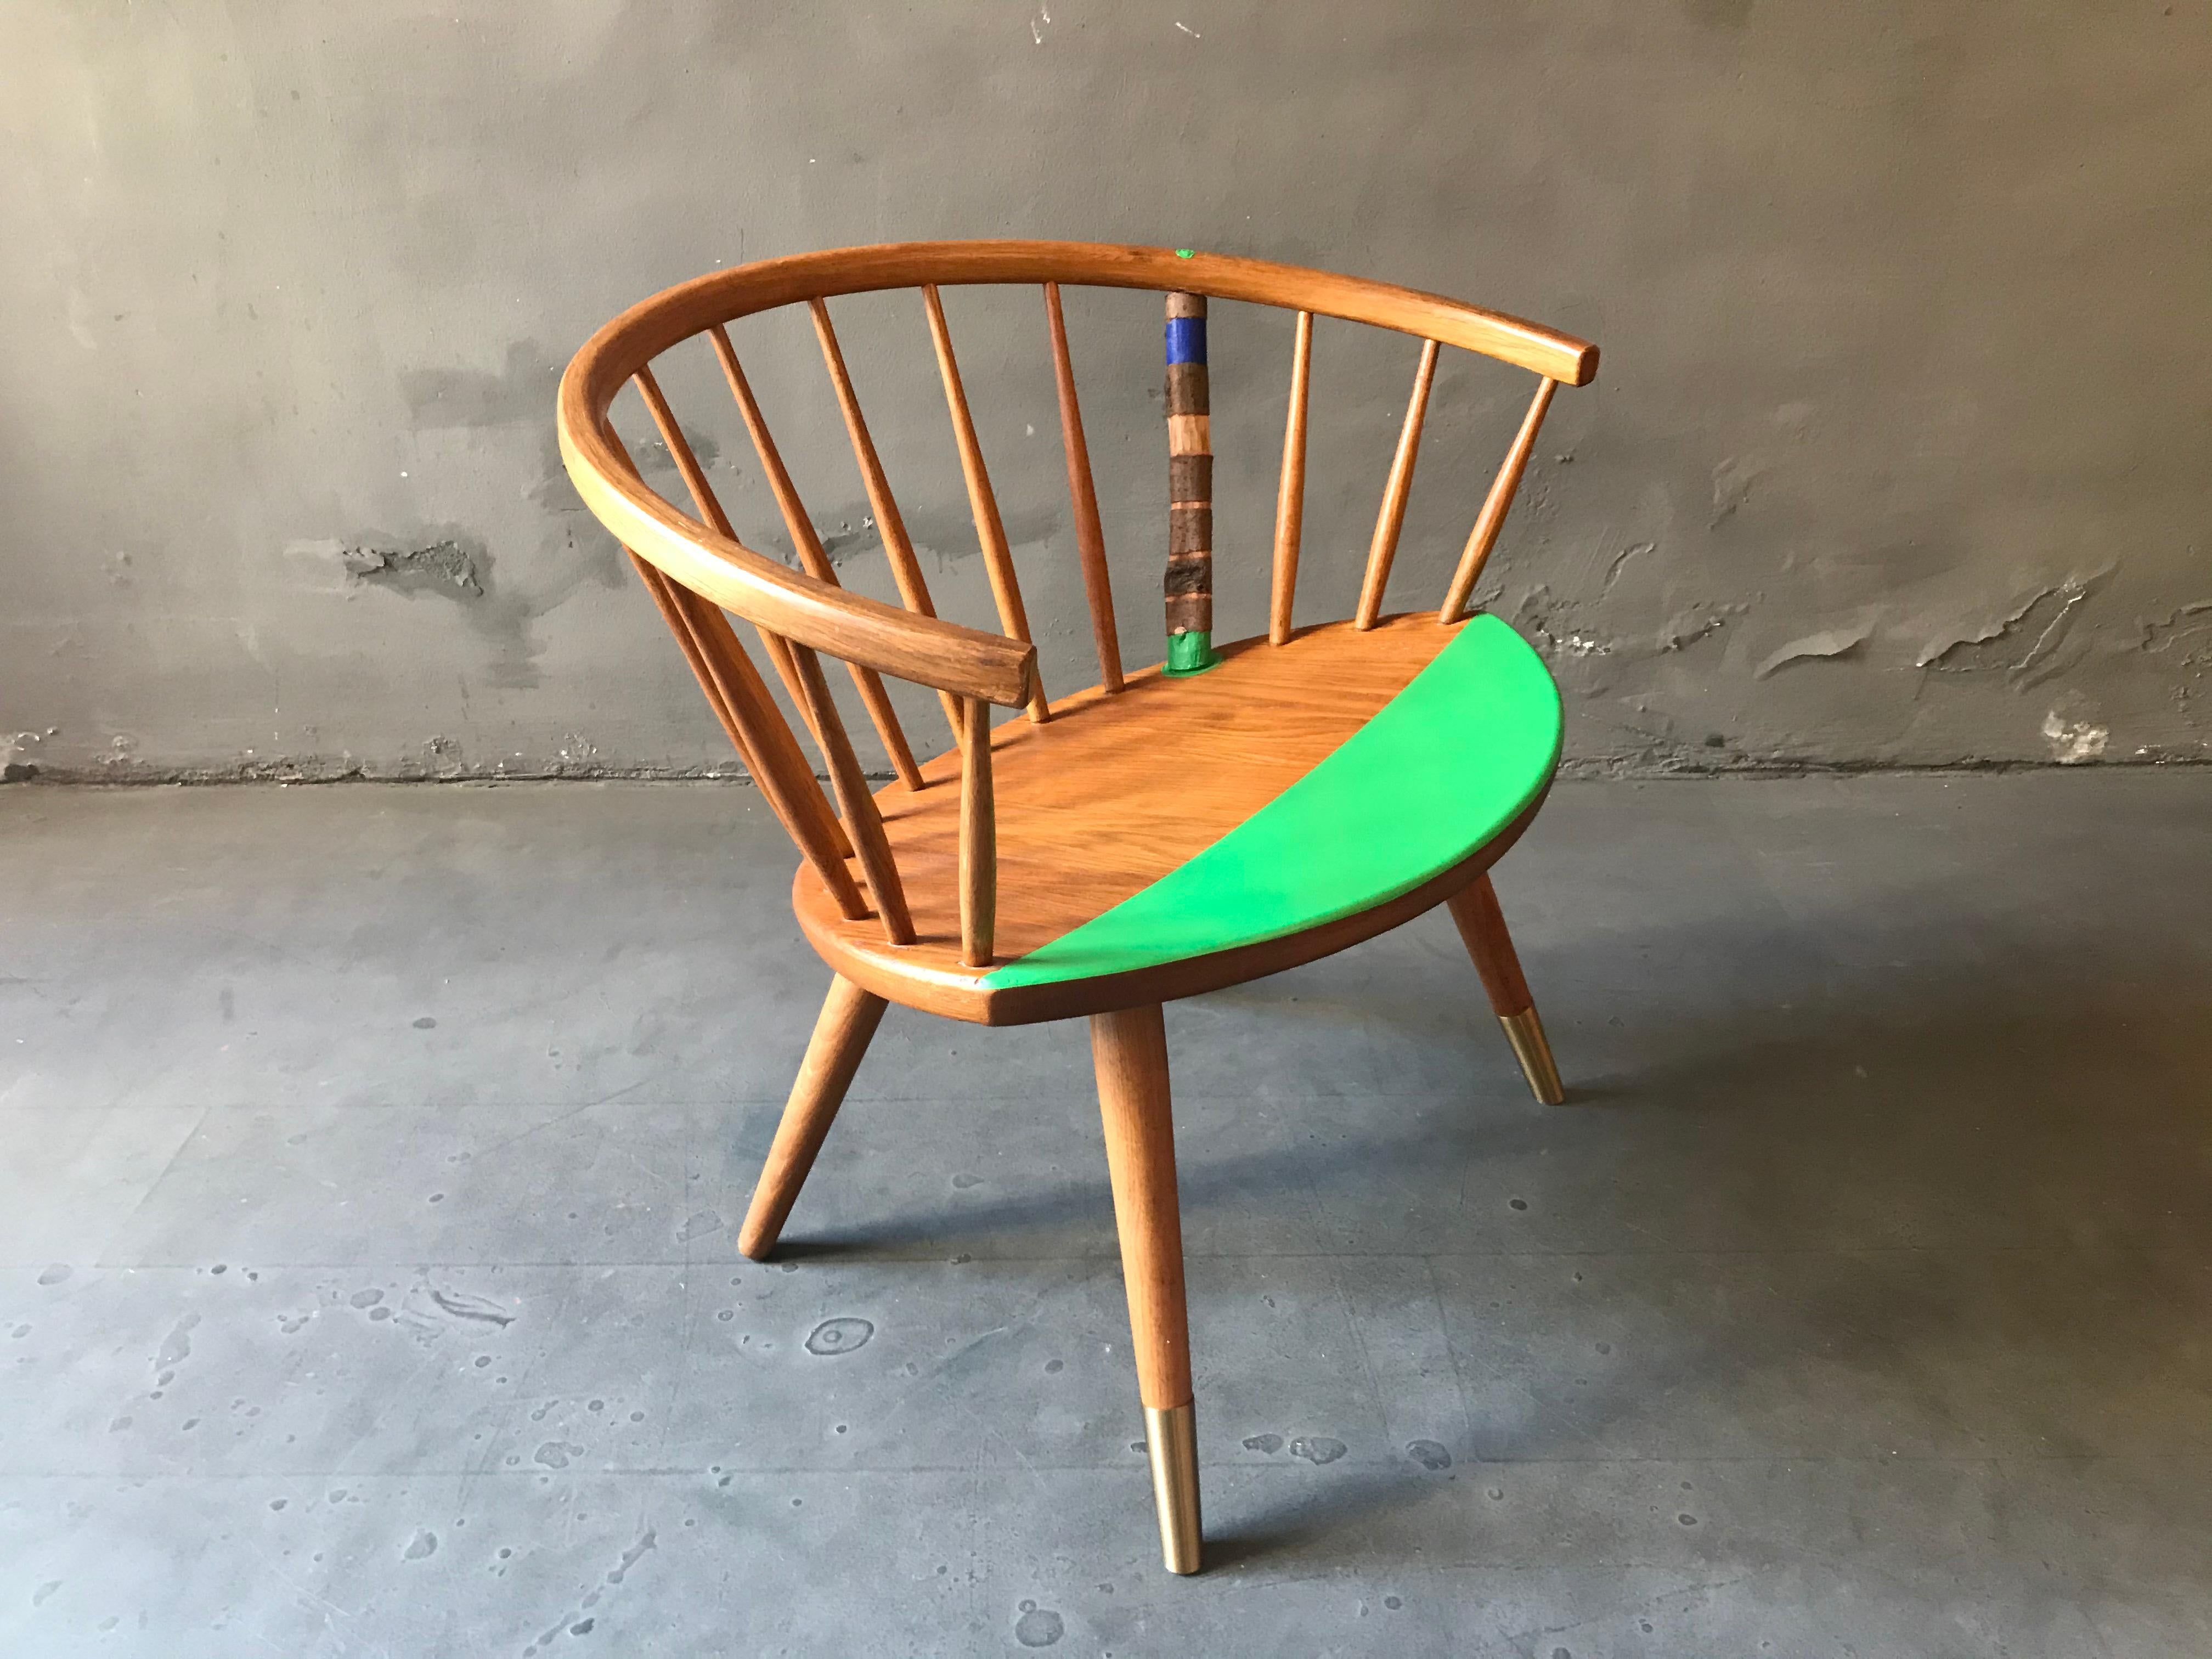 Hand-Carved Yngve Ekström Arka Chair Contemporized and Named 